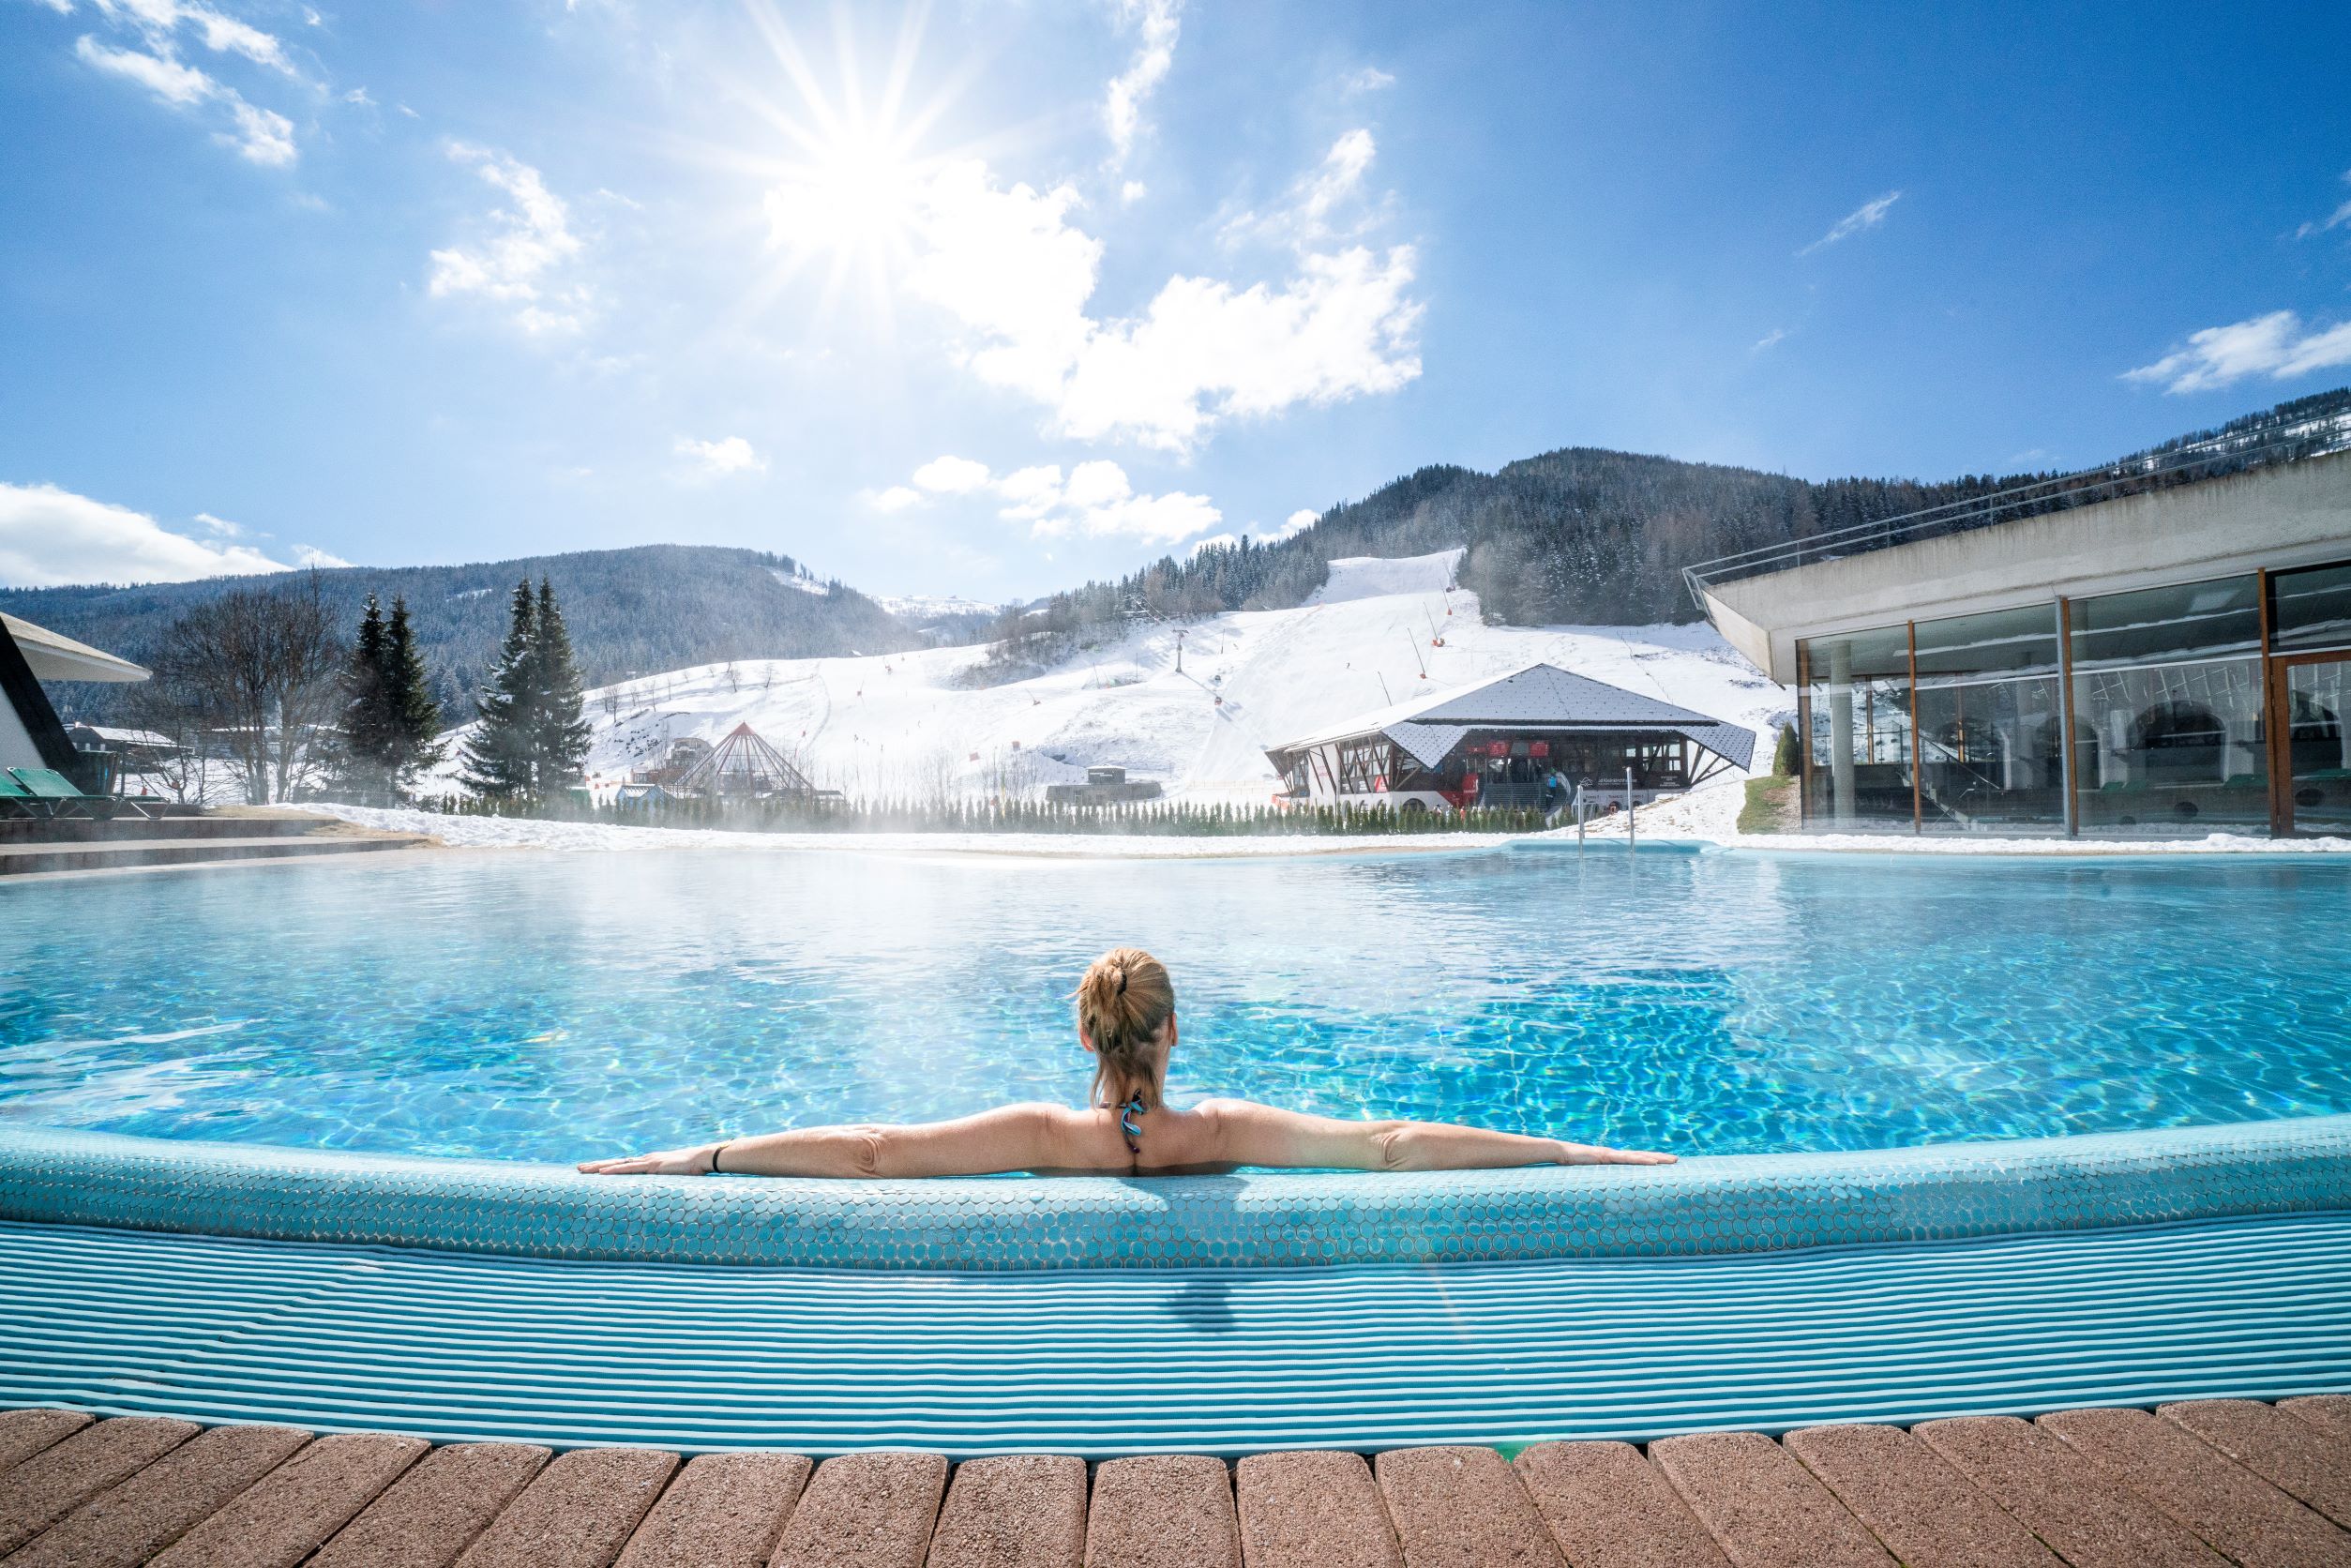 A woman sits in an outdoor pool and looks out over the slopes.